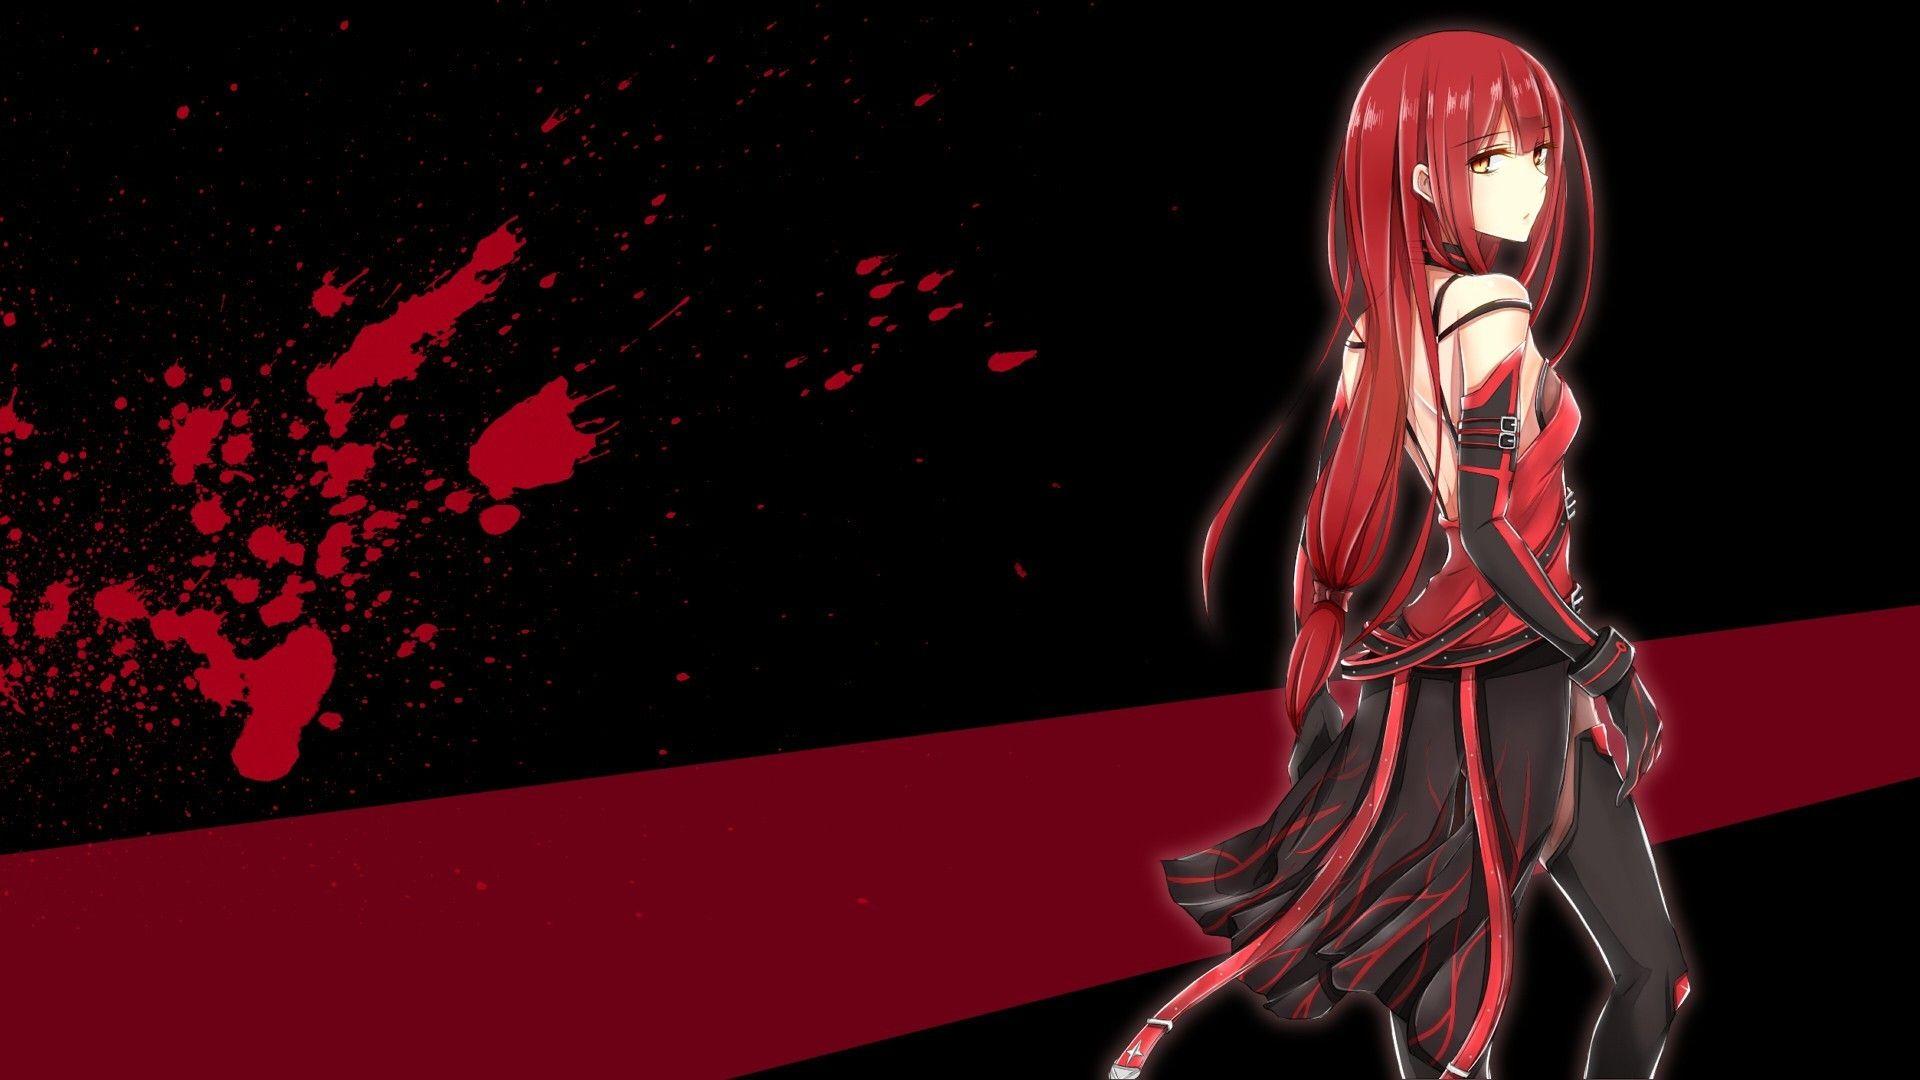 Black And Red Anime Wallpapers - Top Free Black And Red Anime